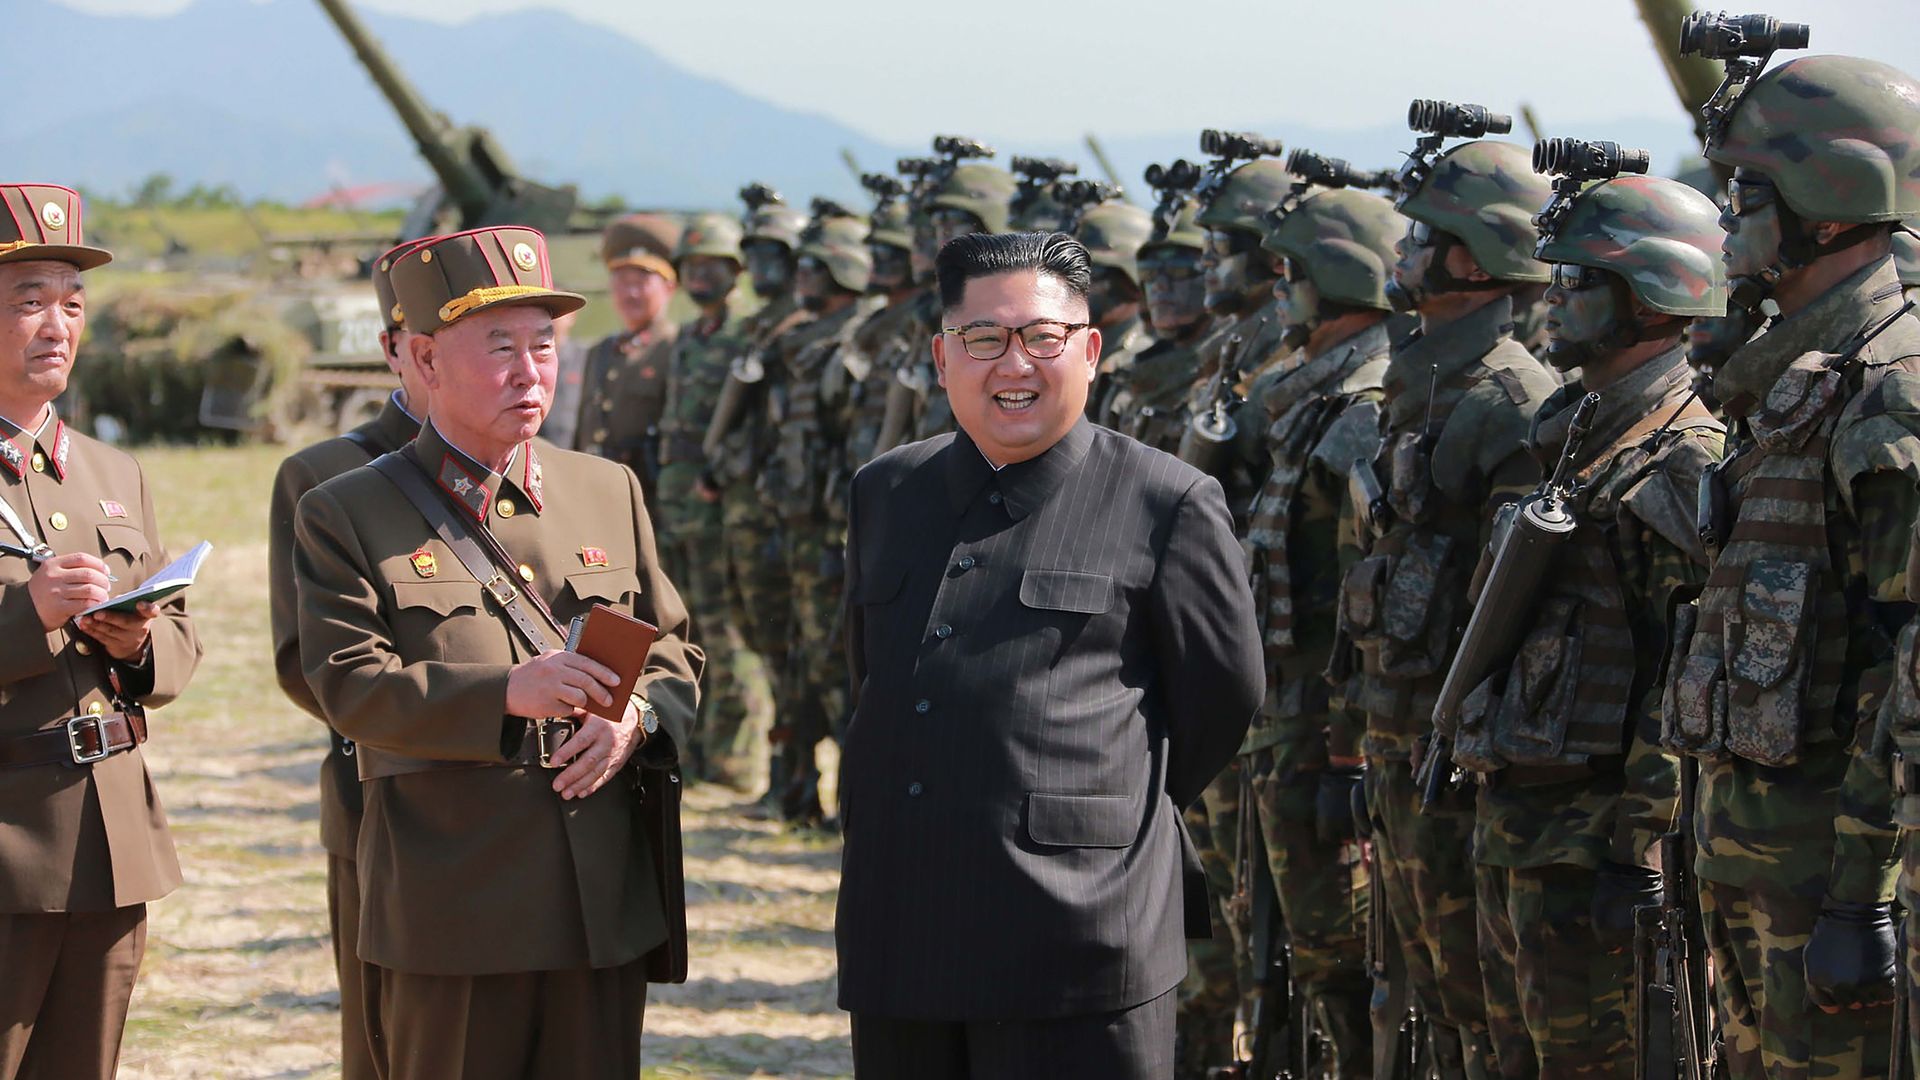 Kim Jong-un with soldiers and artillery